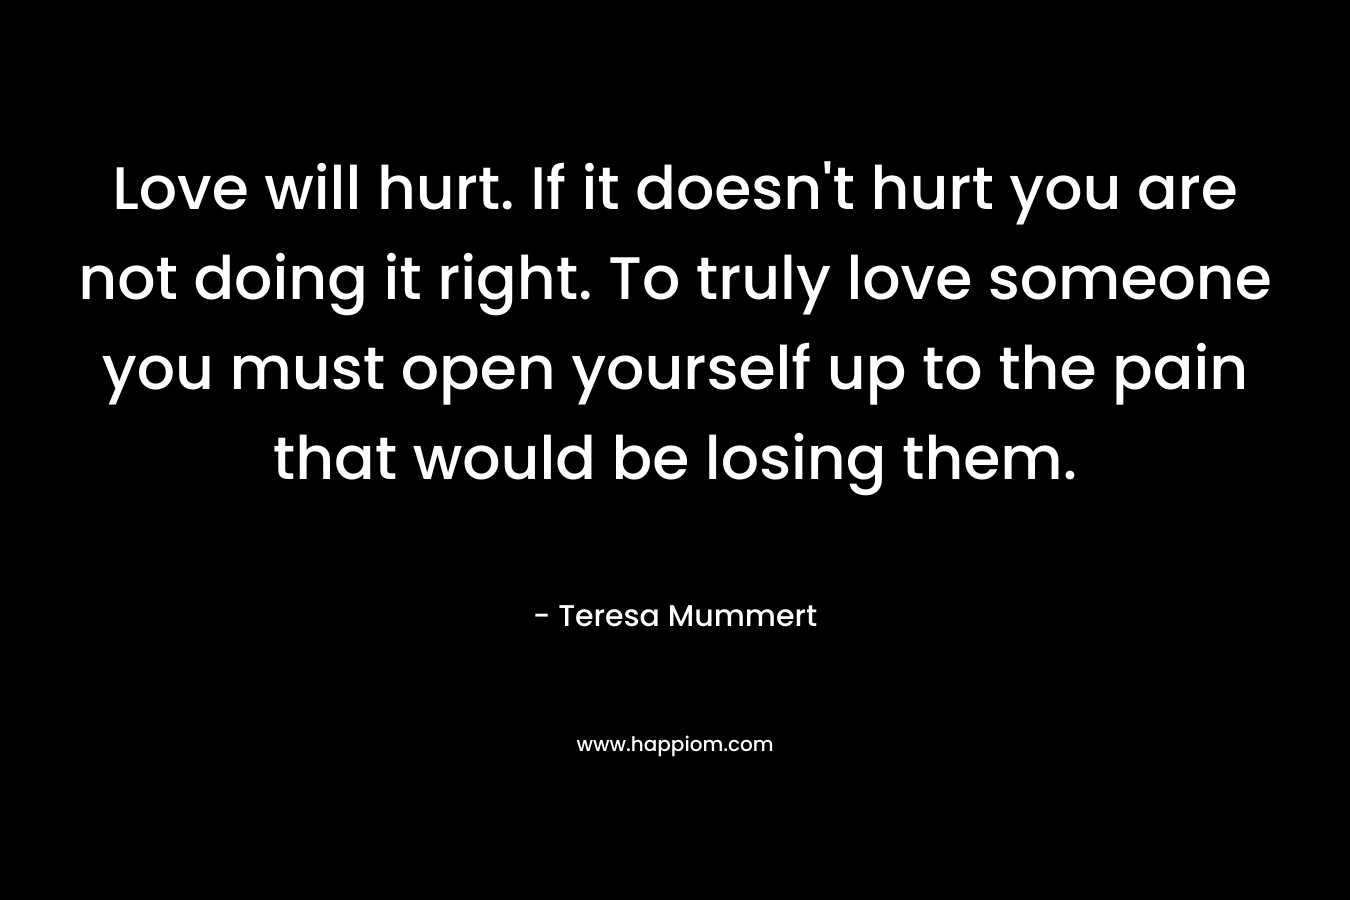 Love will hurt. If it doesn't hurt you are not doing it right. To truly love someone you must open yourself up to the pain that would be losing them.